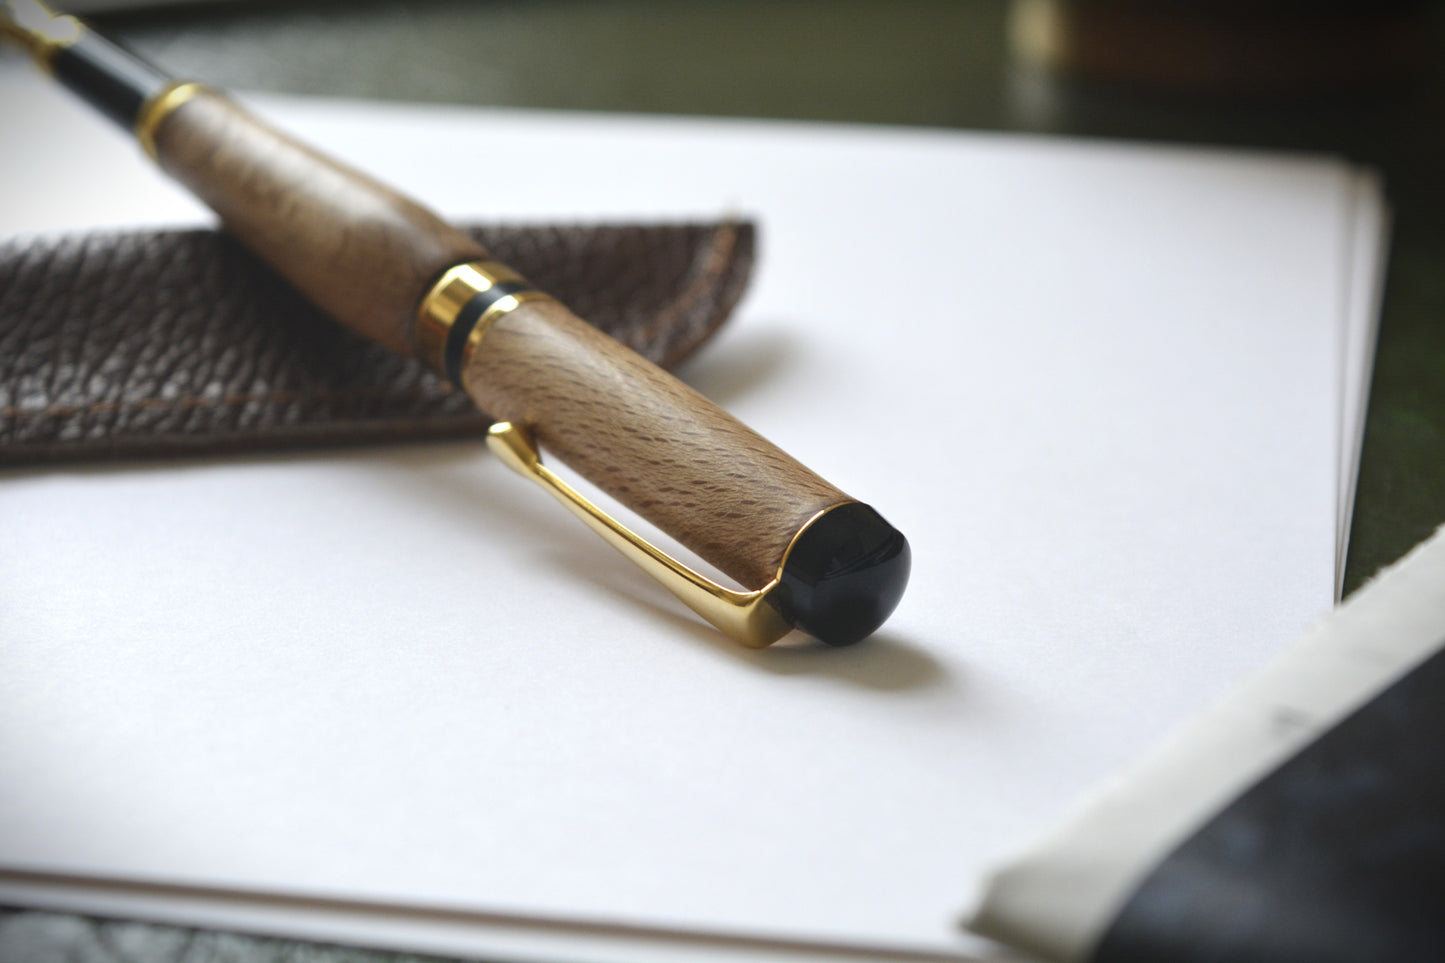 Limited Edition 60th Anniversary Copper Beech Pen